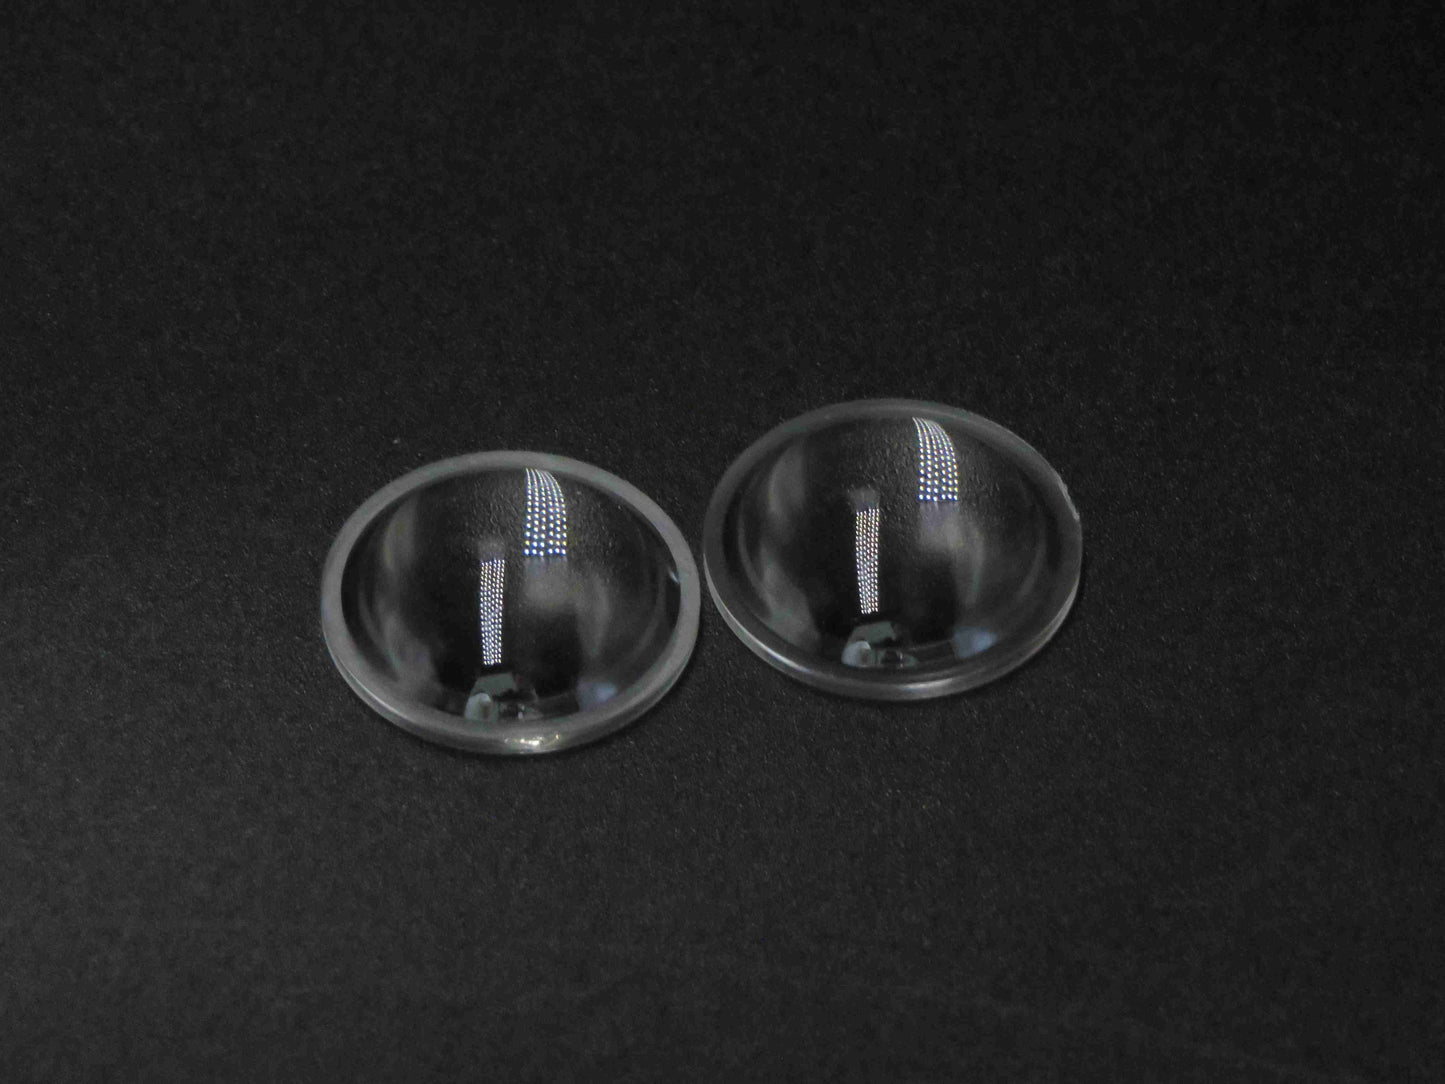 21.5mm led lenses for projector light concentrating projection lamp lens manufactures